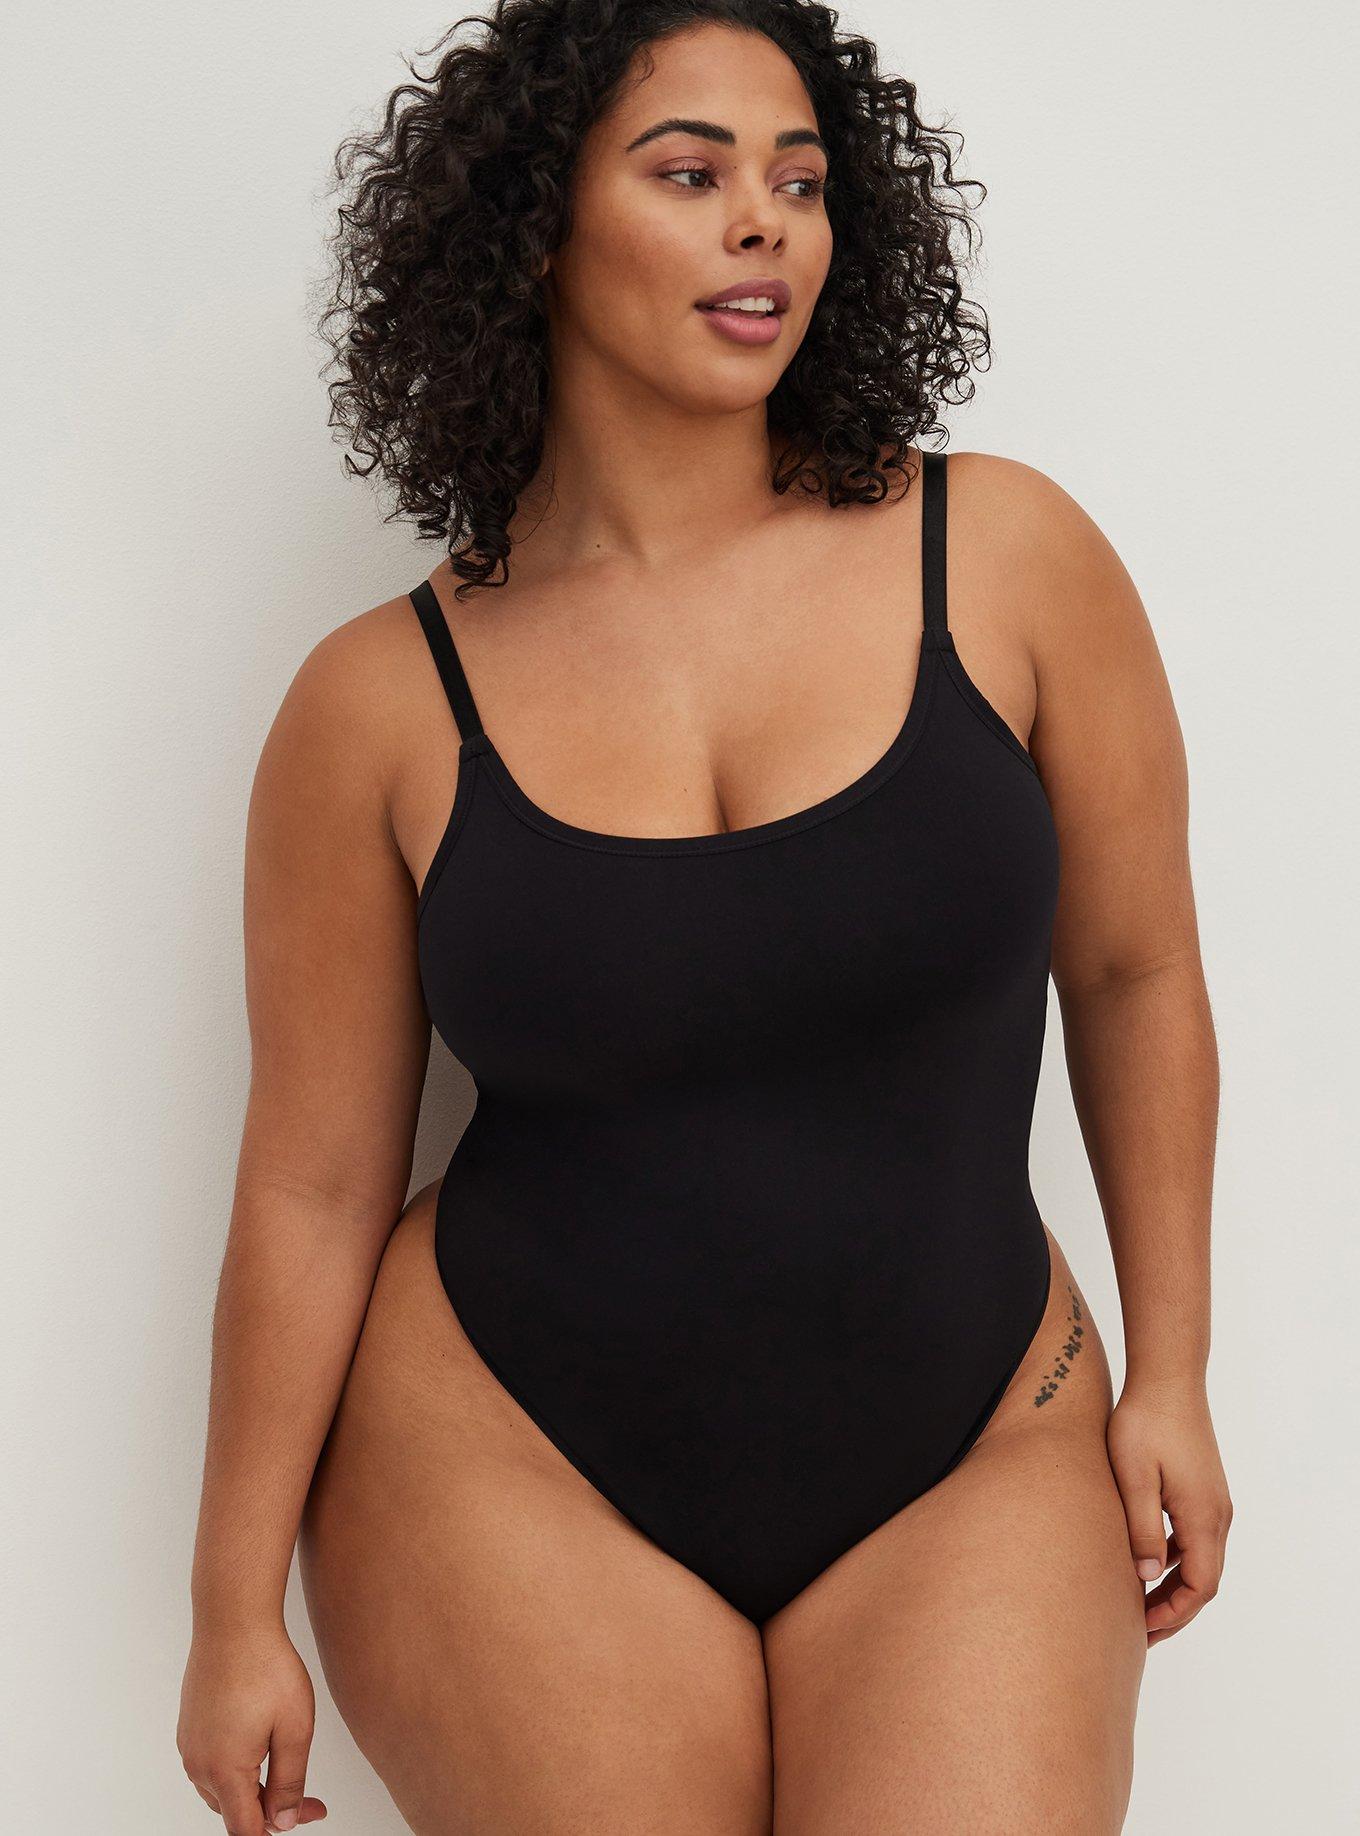 FLAME OF LOVE - Tank Open Sides Thong One Piece Bodysuit • Black